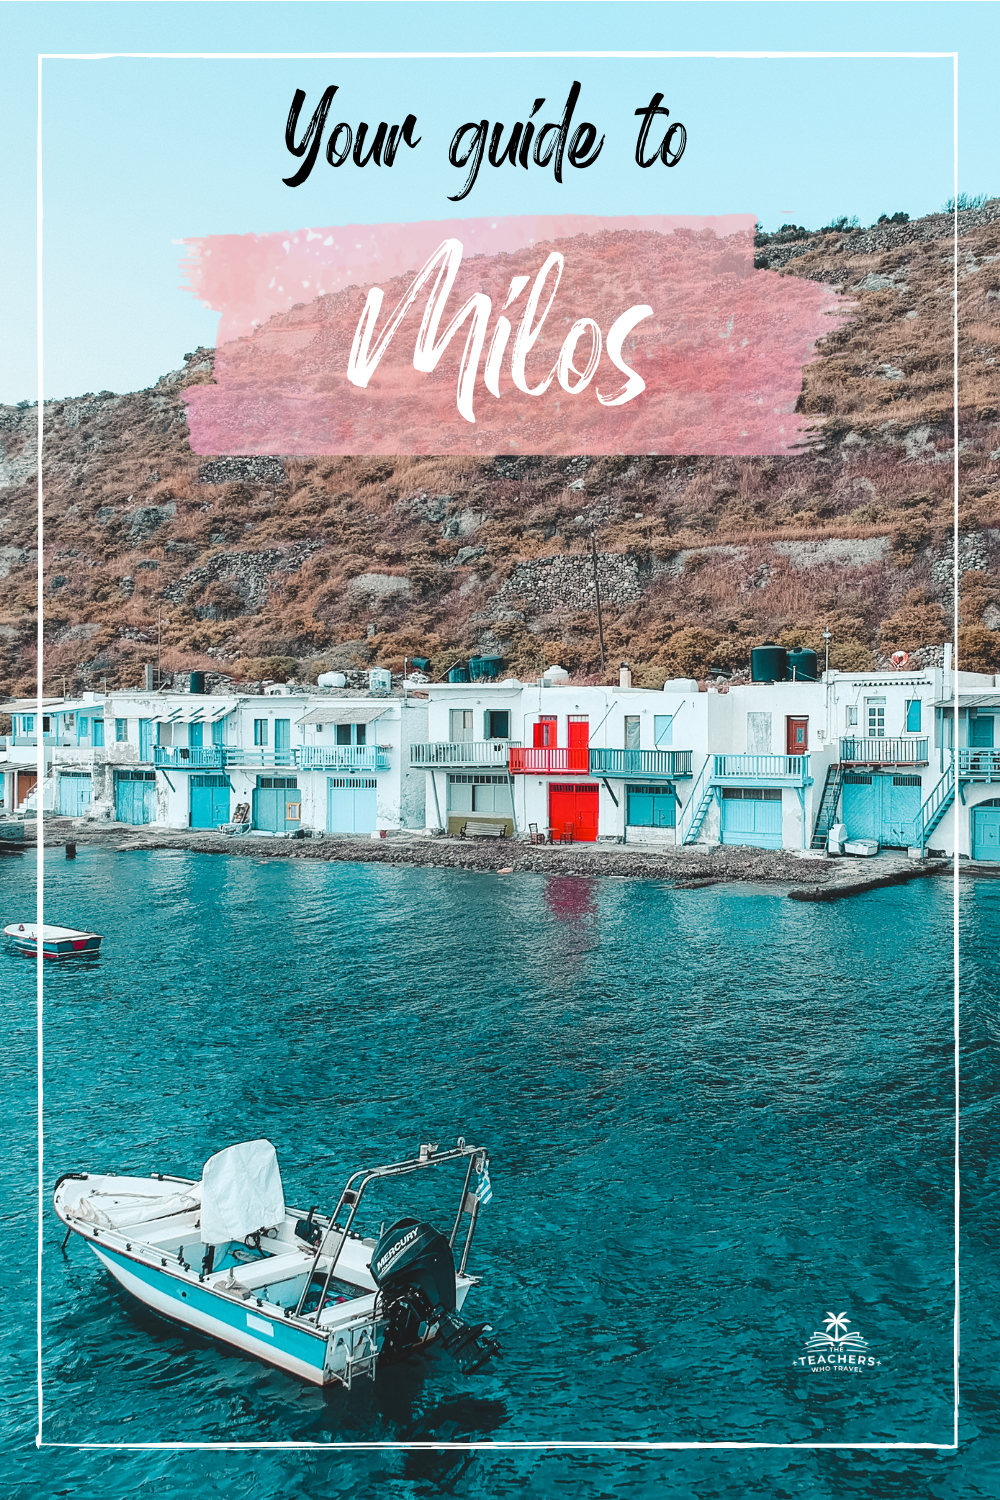 Klima village with nearby boats. Things to do in Milos